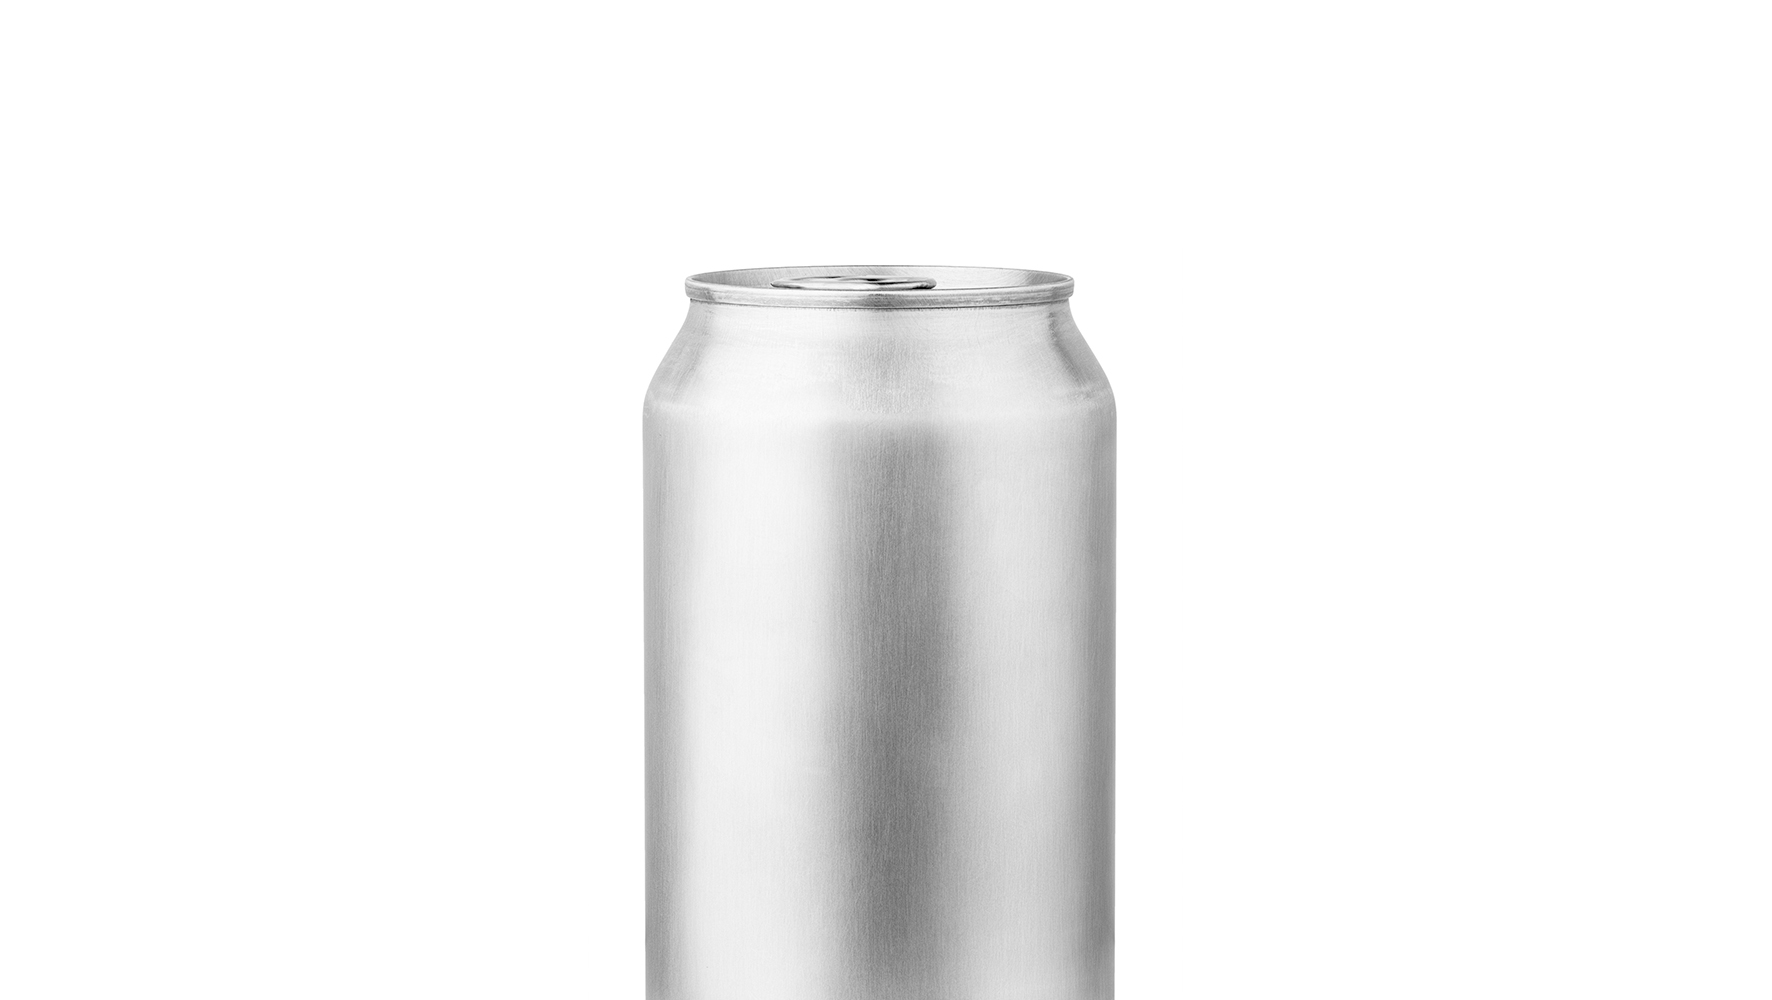 Photo of an aluminum can